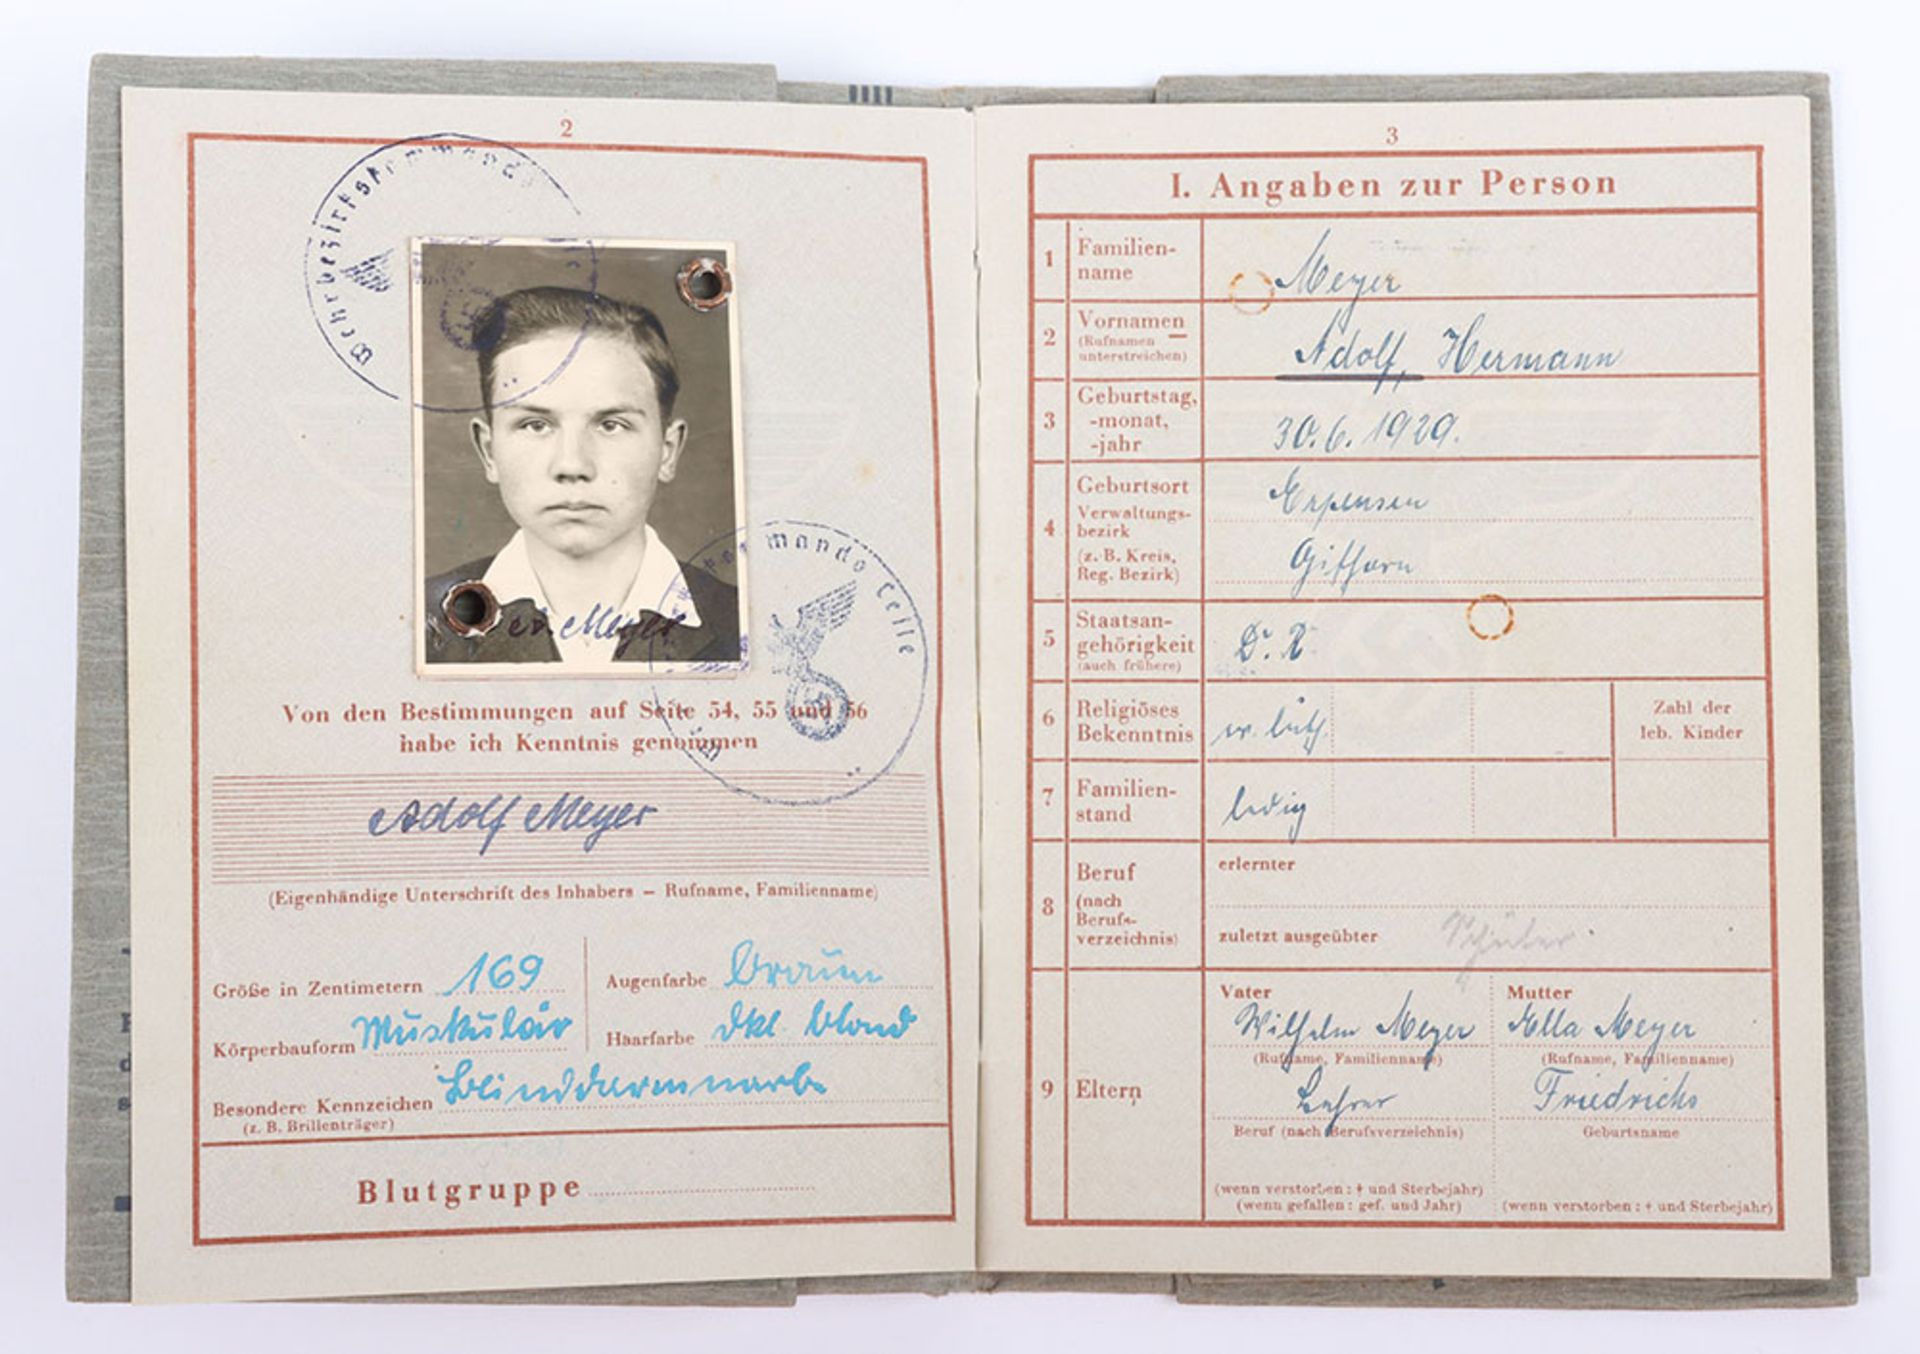 WW2 German Armed Forces Wehrpass Issued in April 1945 - Image 9 of 37